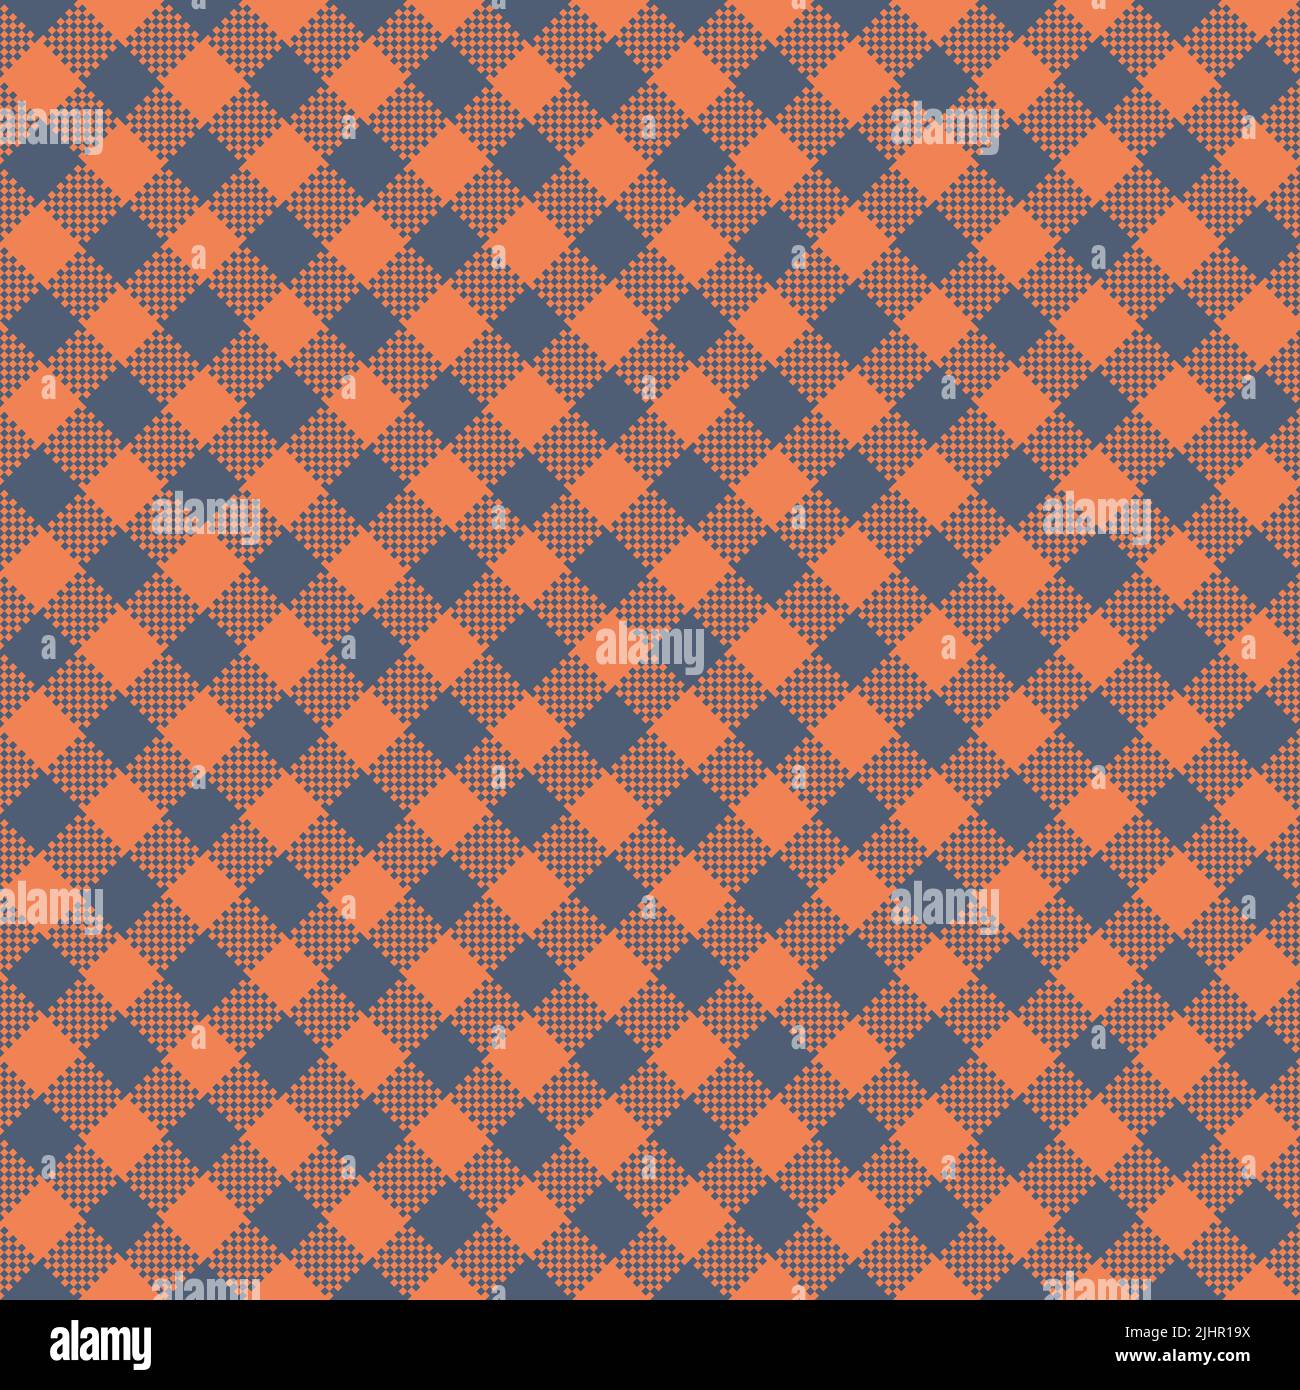 plaid pattern images hi-res Alamy - photography stock and Coral background